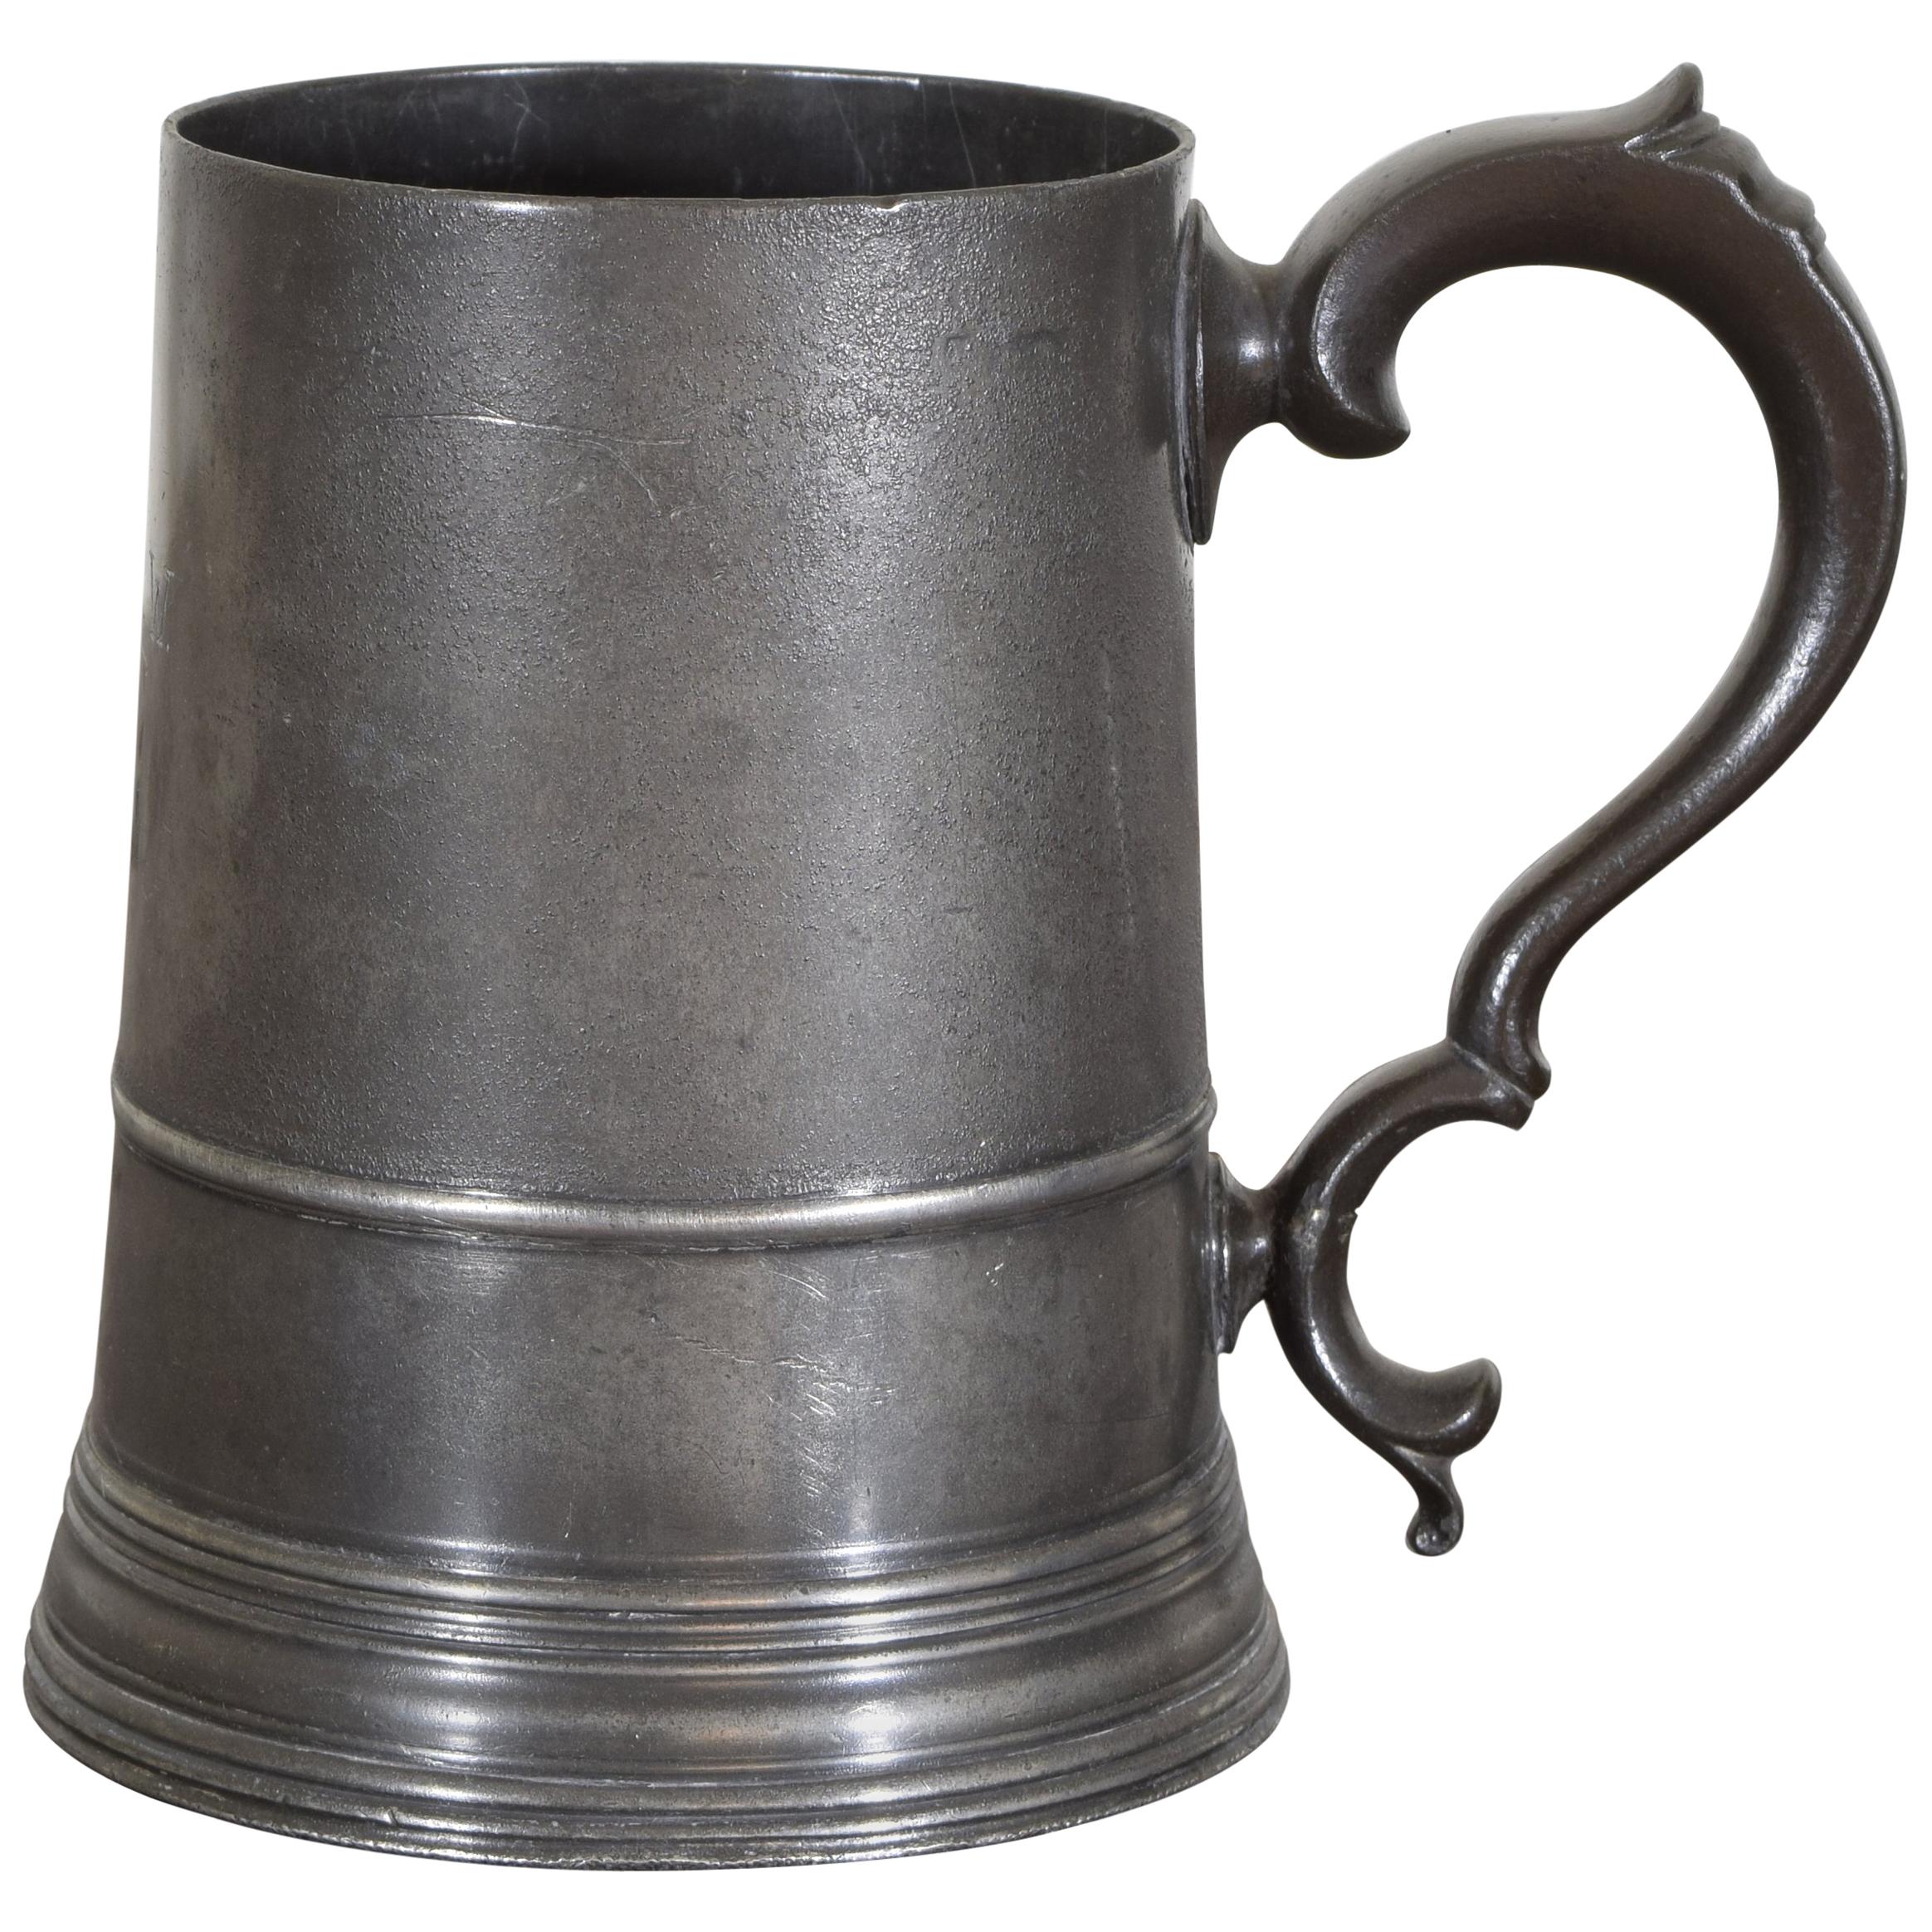 Pewter Gambler's Ale Stein from the Late 18th-Early 19th Century